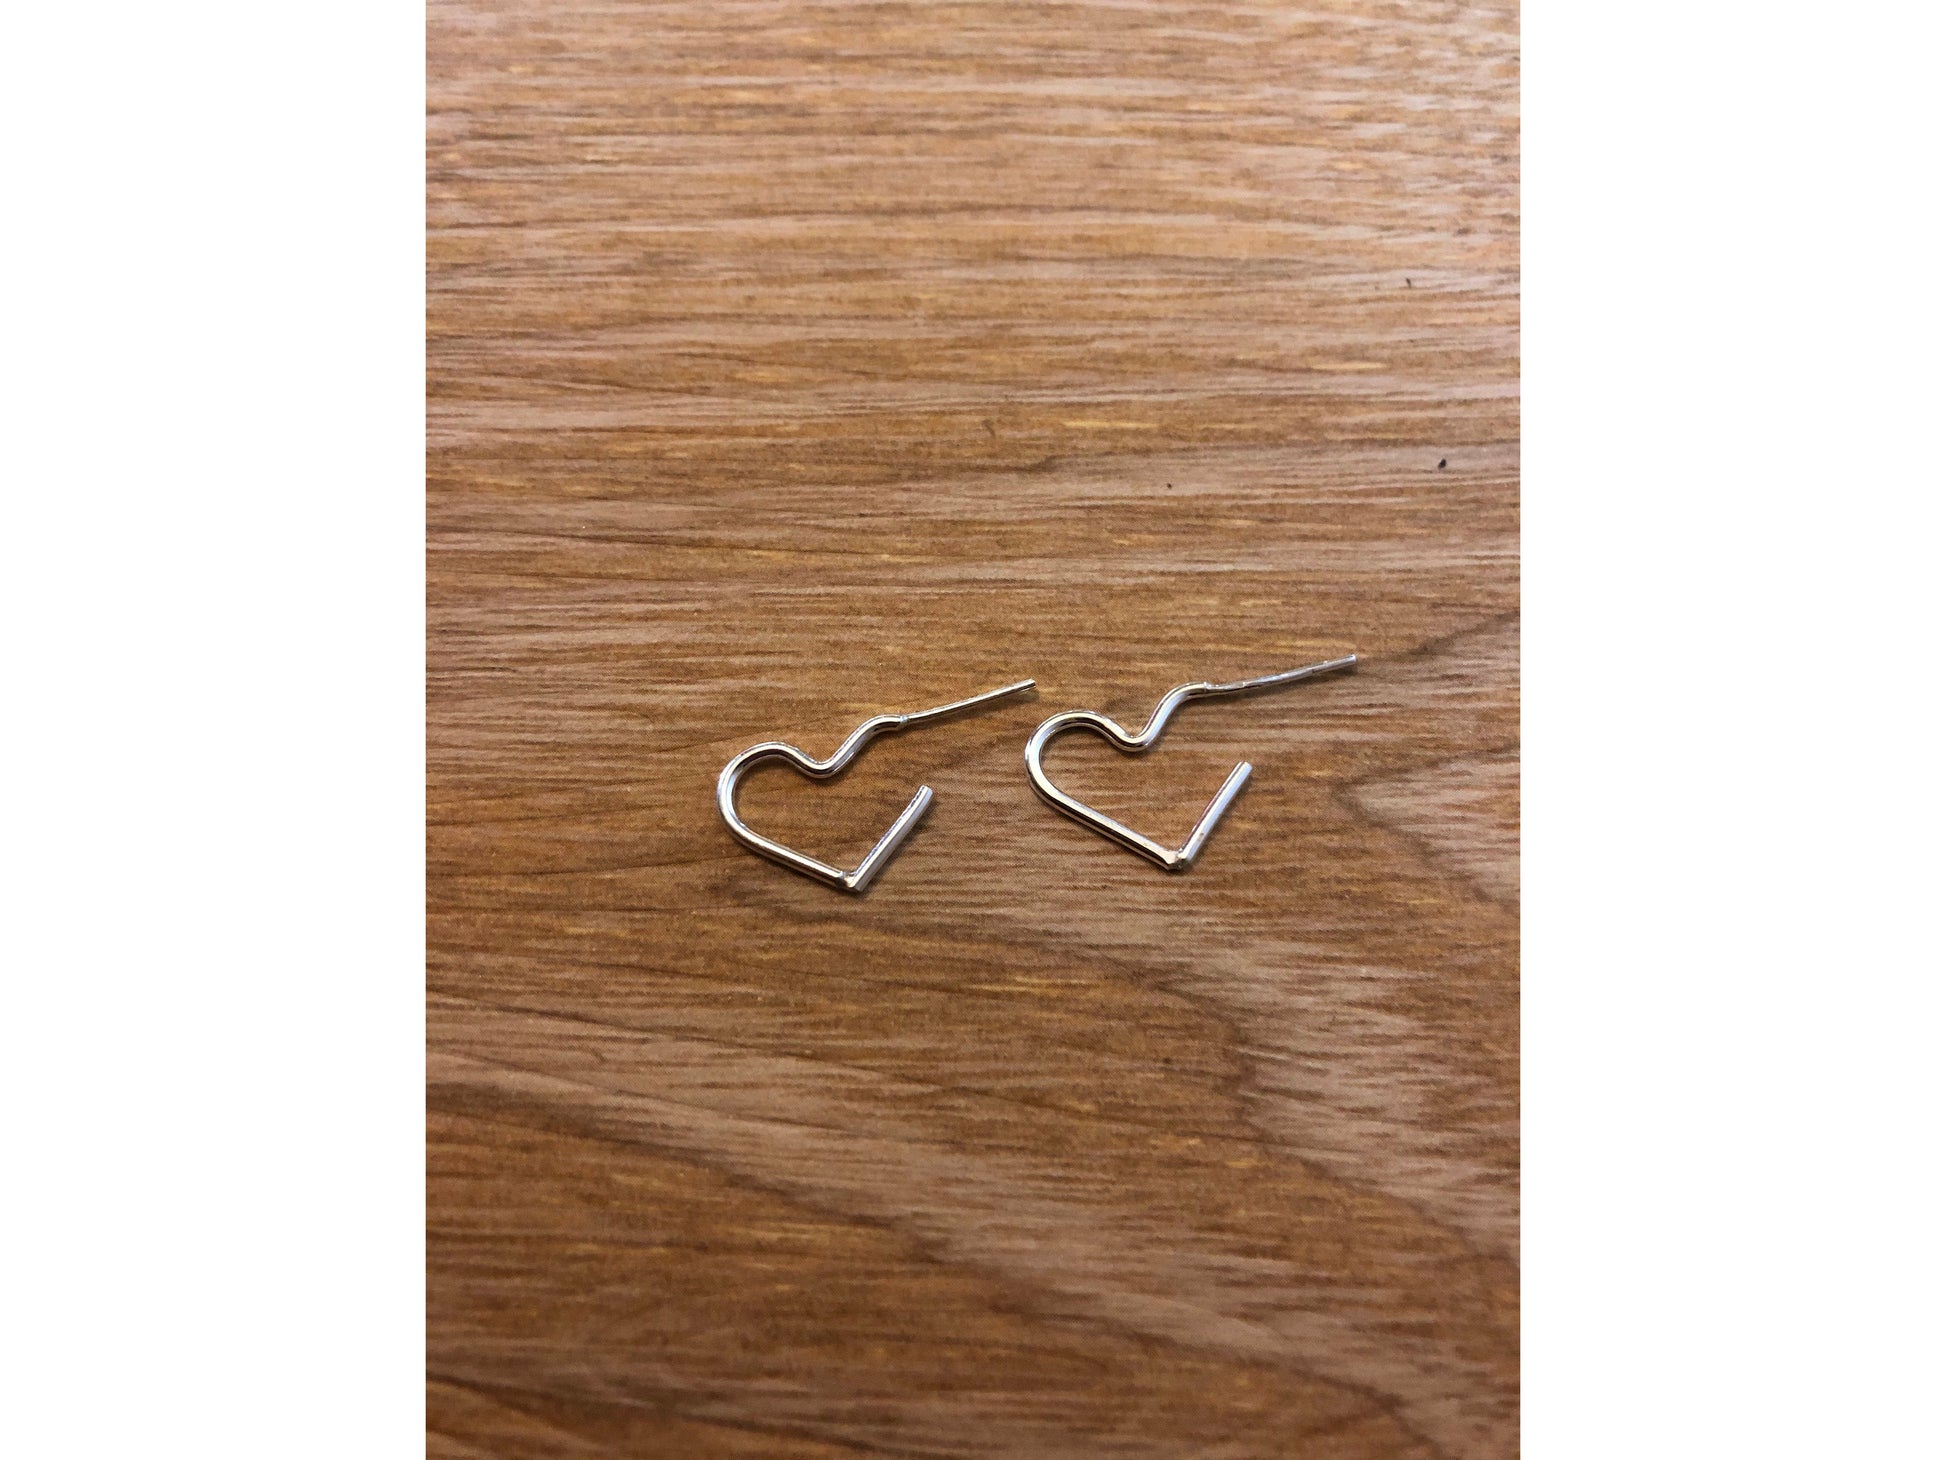 silver wire makes a heart shape